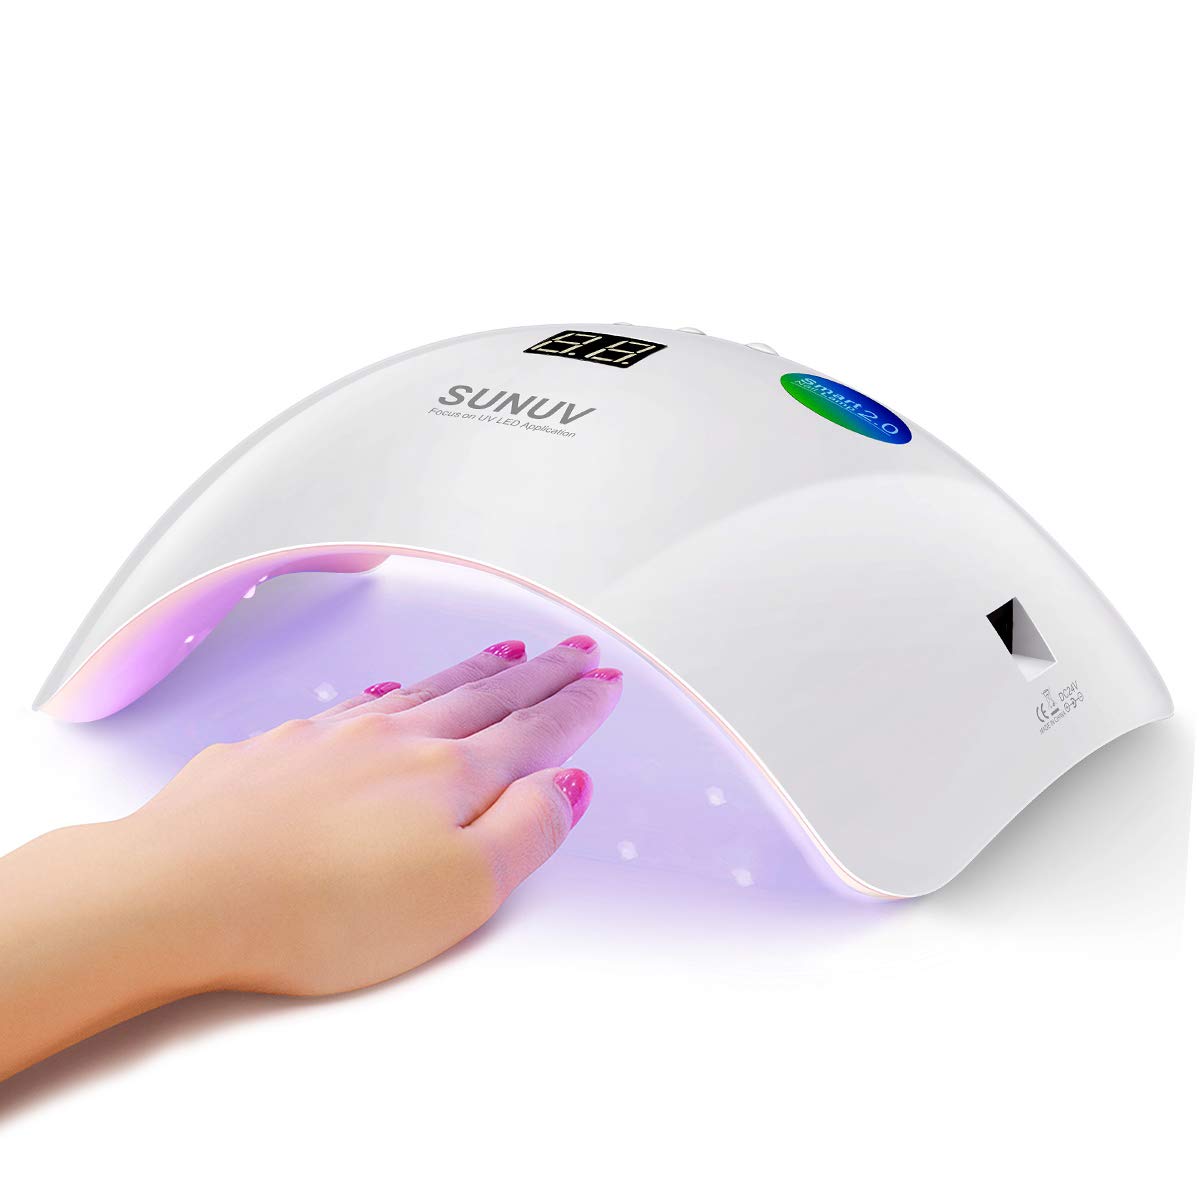 Led UV Nail Lights Dryer Ultraviolet Nail Lamp Mini Flexible Clip-On Desk  Touch Screen Control Gel Curing Manicure Tools - AliExpress